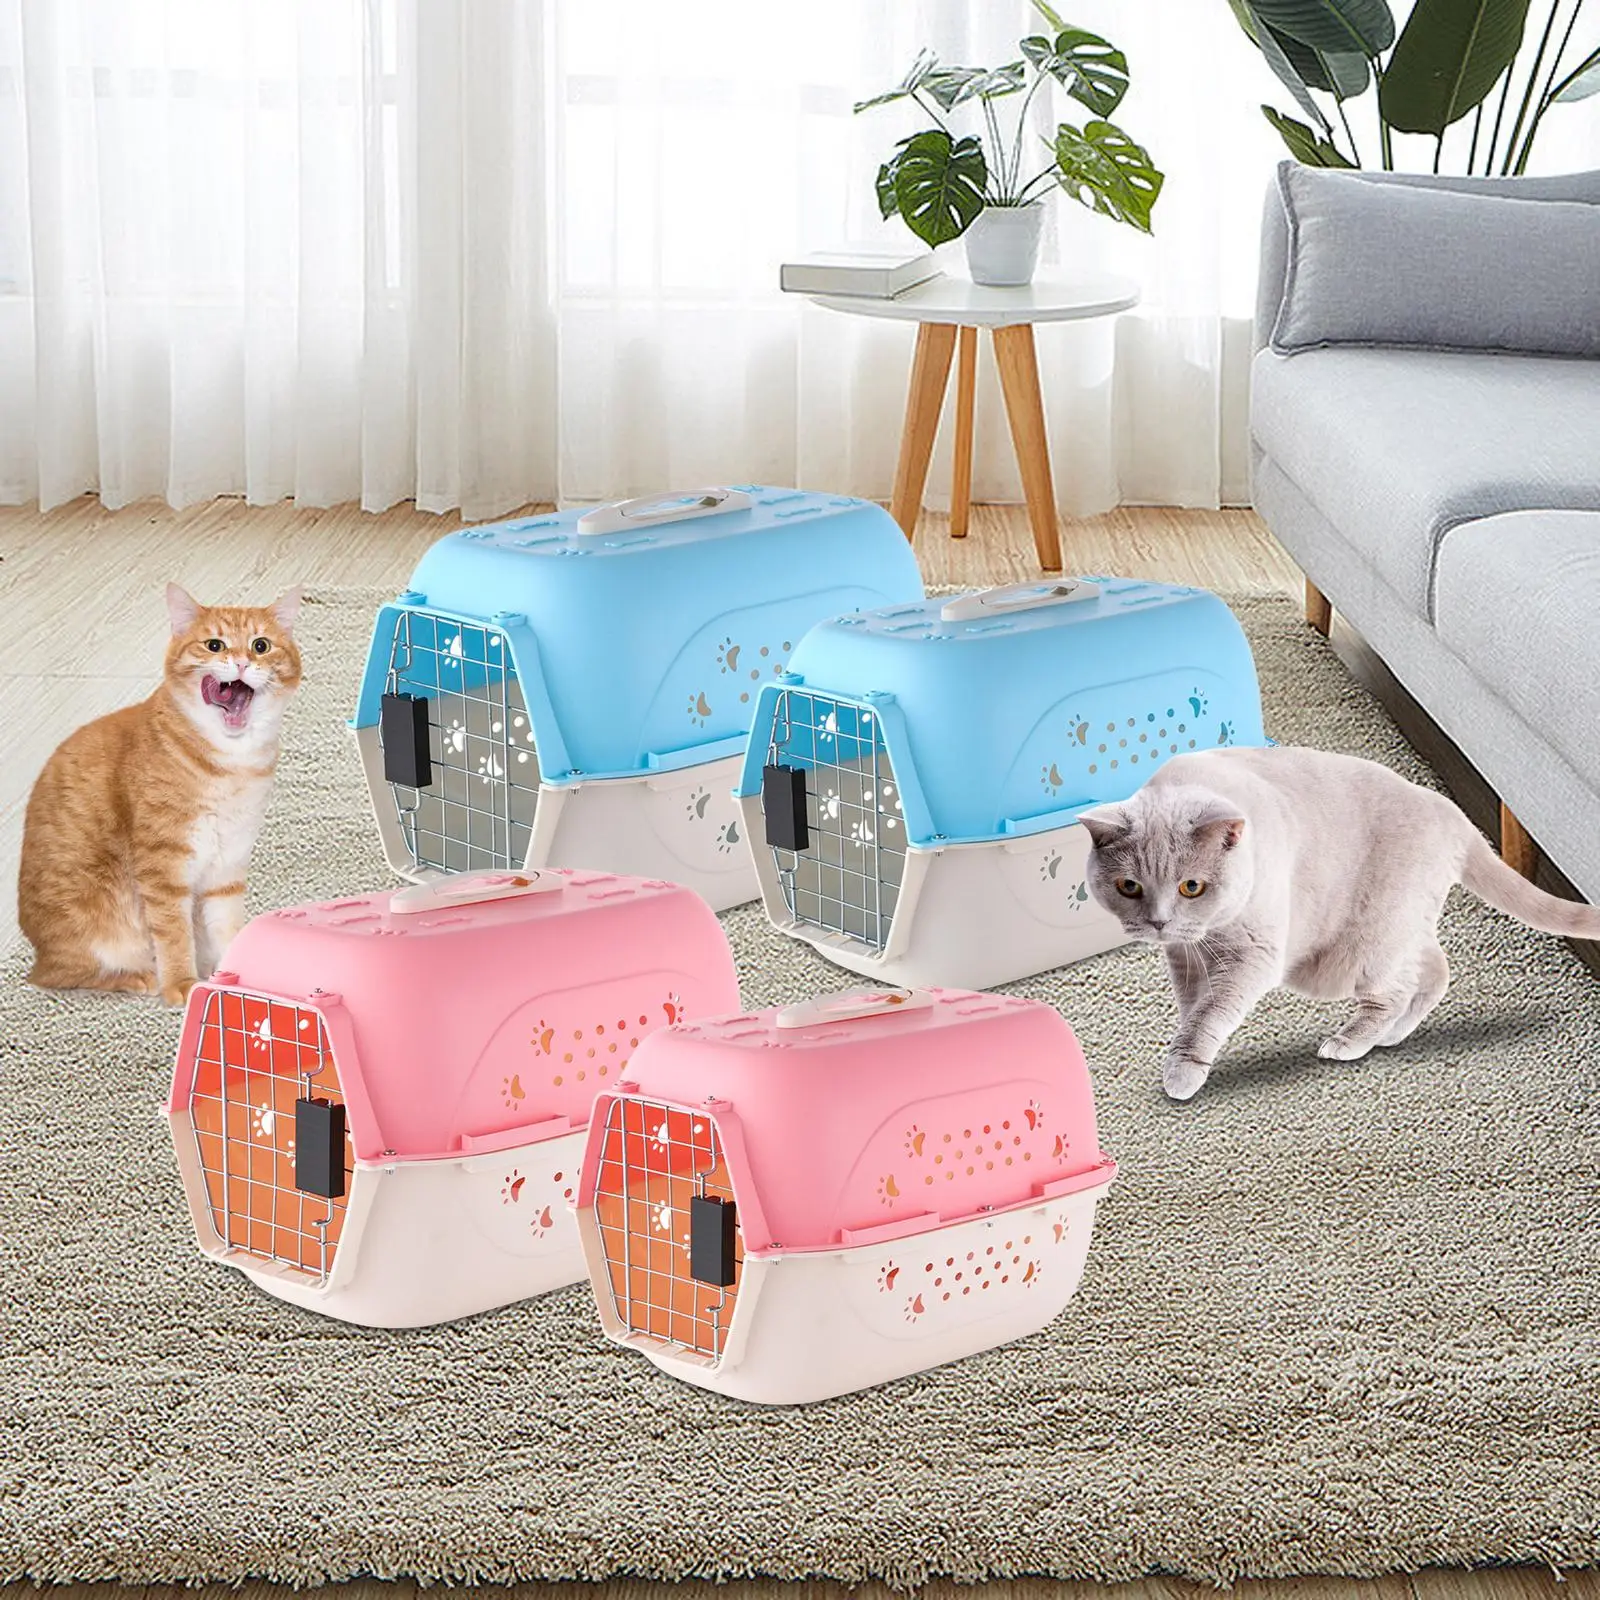 Portable Cat Cage Airline Carrying Case Nest Pet Supplies Hard Sided Travel Carrier for Rabbits Hiking Sightseeing Outdoor